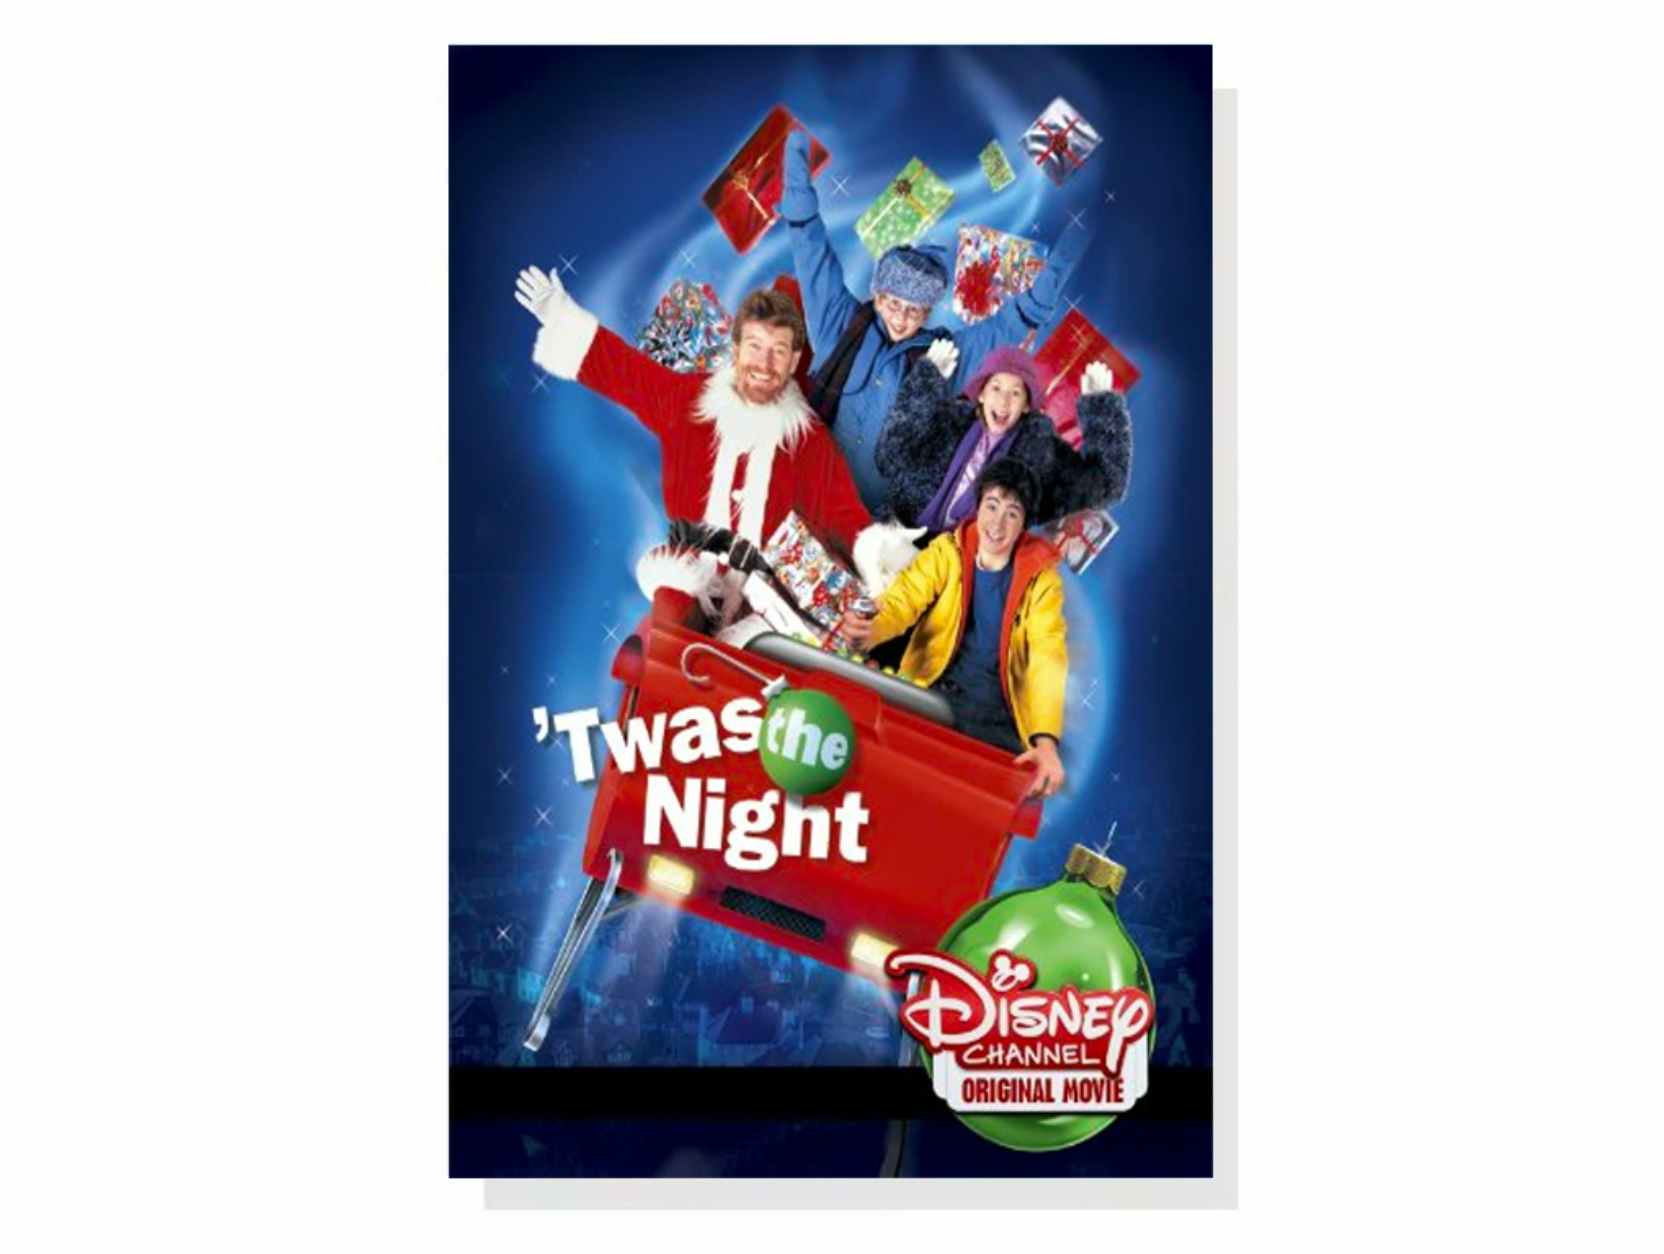 Movie poster for Twas the Night, one of the best Christmas movies on Disney Plus.